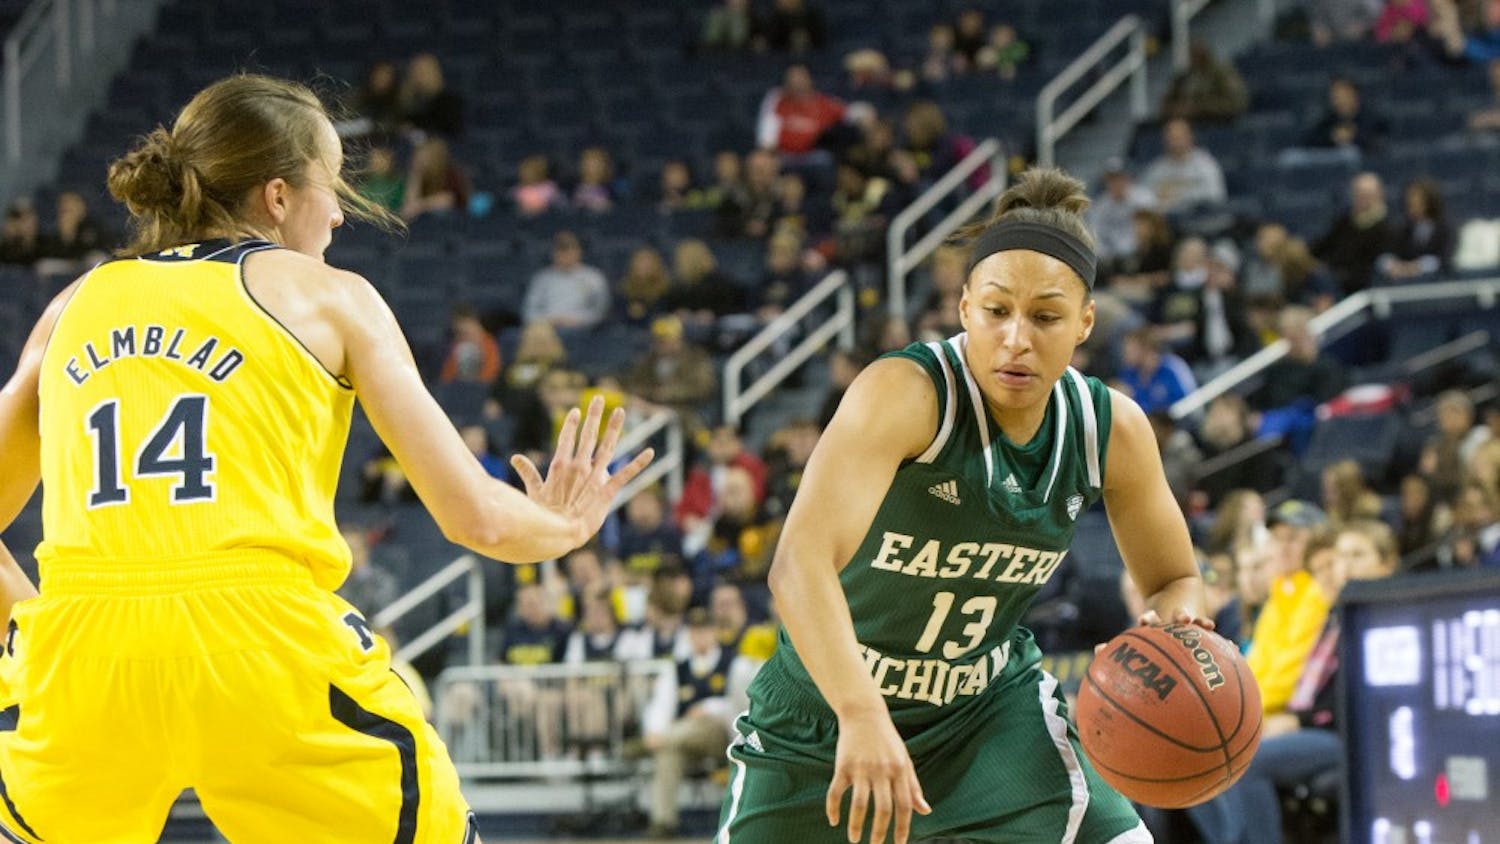 EMU guard Janay Morton (13) led the team, off the bench, with 21 points in Eastern Michigan's 89-75 loss to Michigan Wednesday night in Ann Arbor.